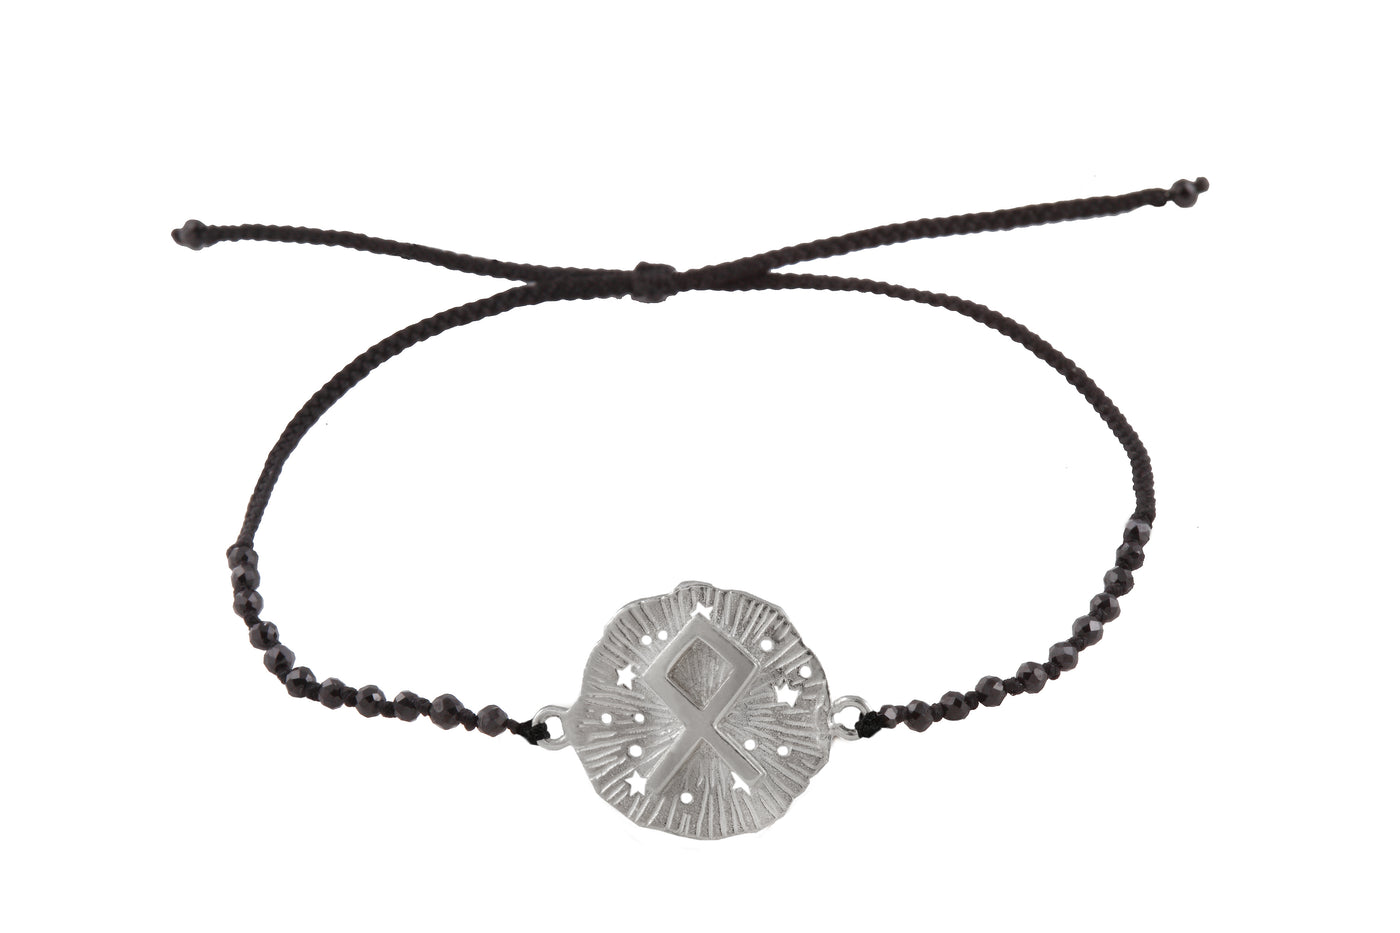 Runic medallion amulet Odal bracelet with beads. Silver